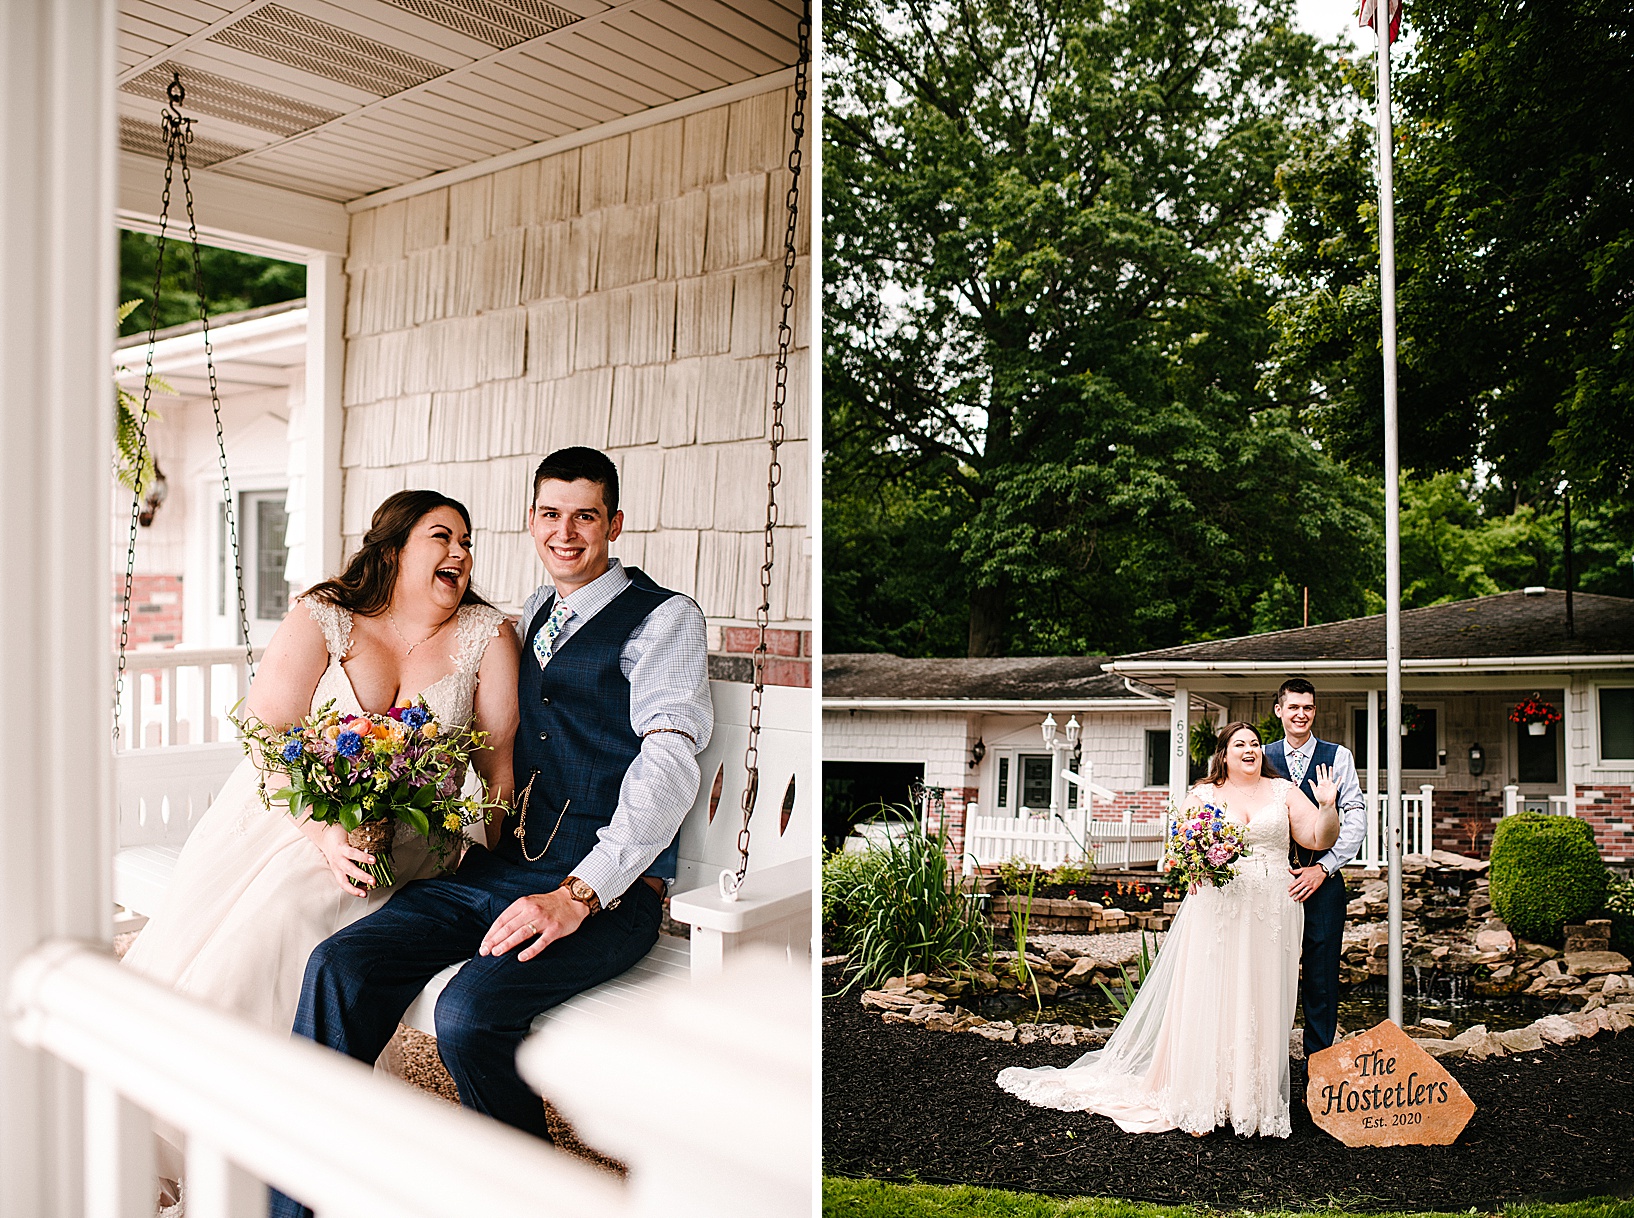 Groom and bride laugh on white swing of their new front porch